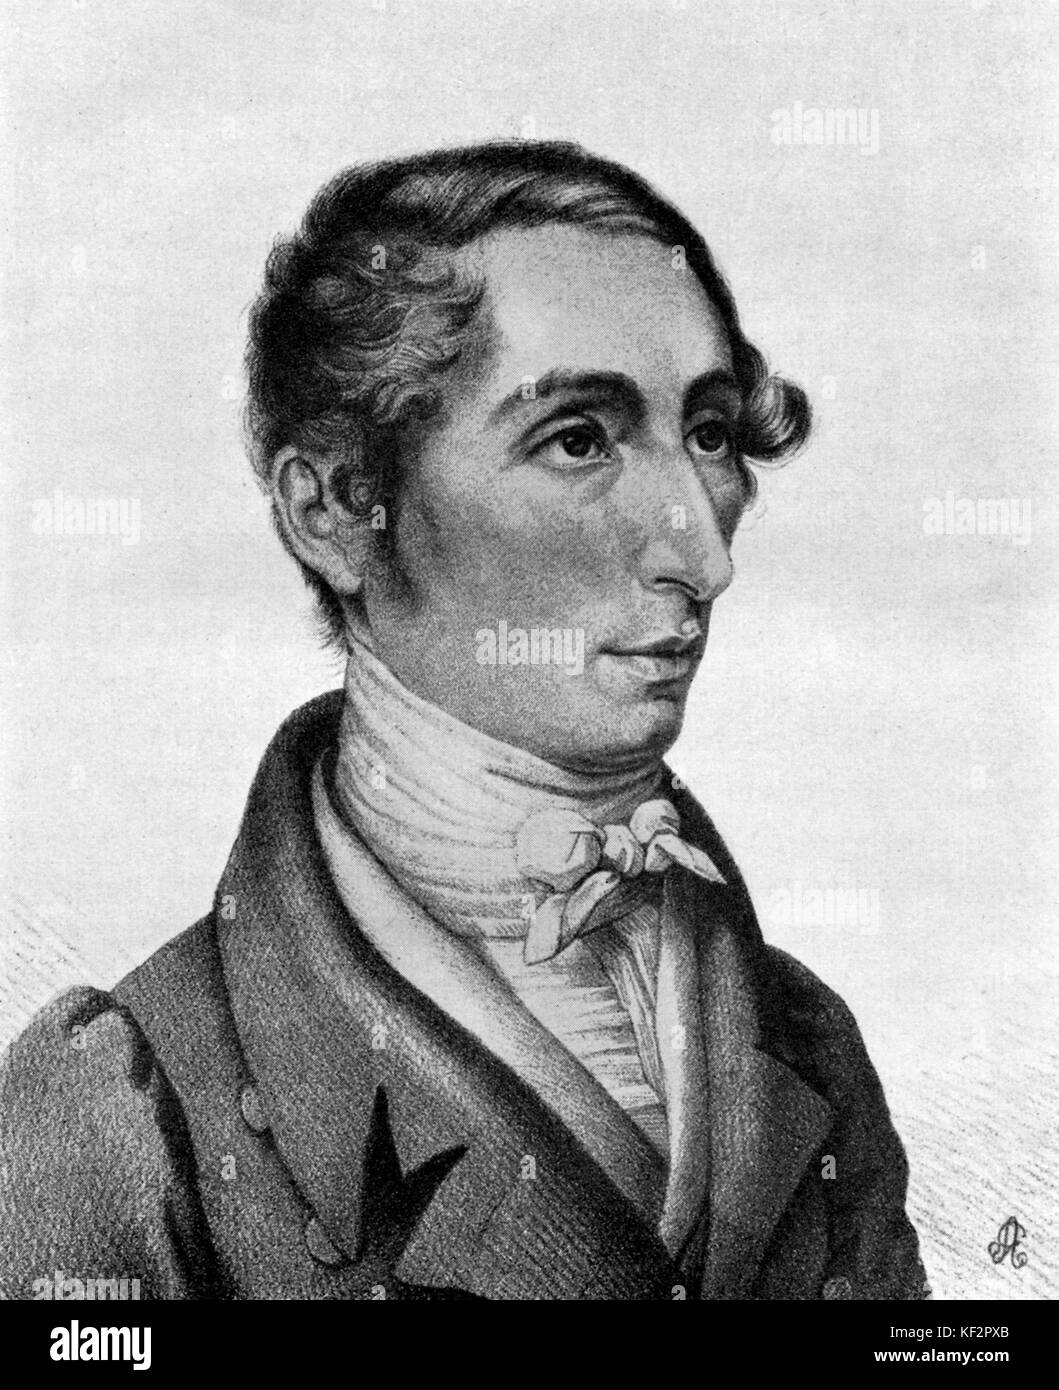 Carl Maria von Weber, composer.  From a lithograph by Gentili.  German composer and conductor: 18 November 1786 - 5 June 1826. Stock Photo